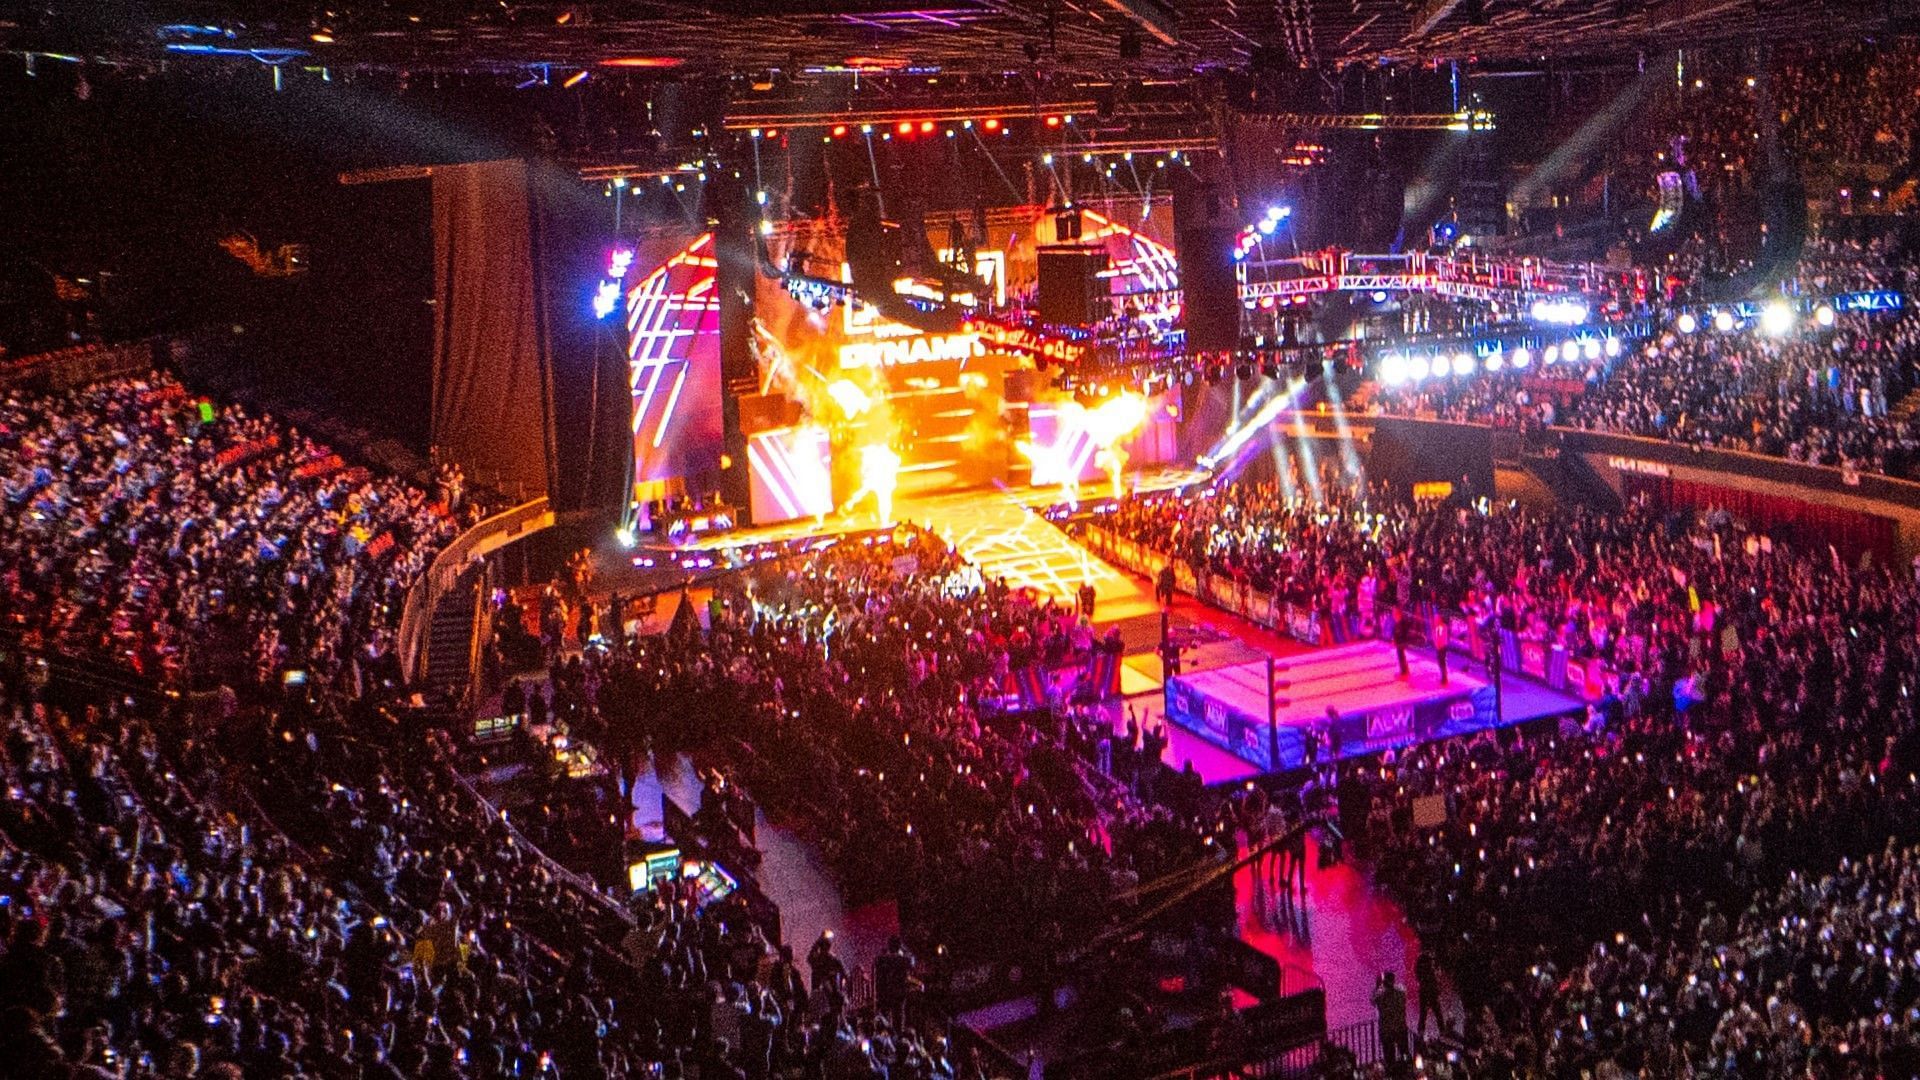 AEW fans pack the local arena for a live Dynamite taping